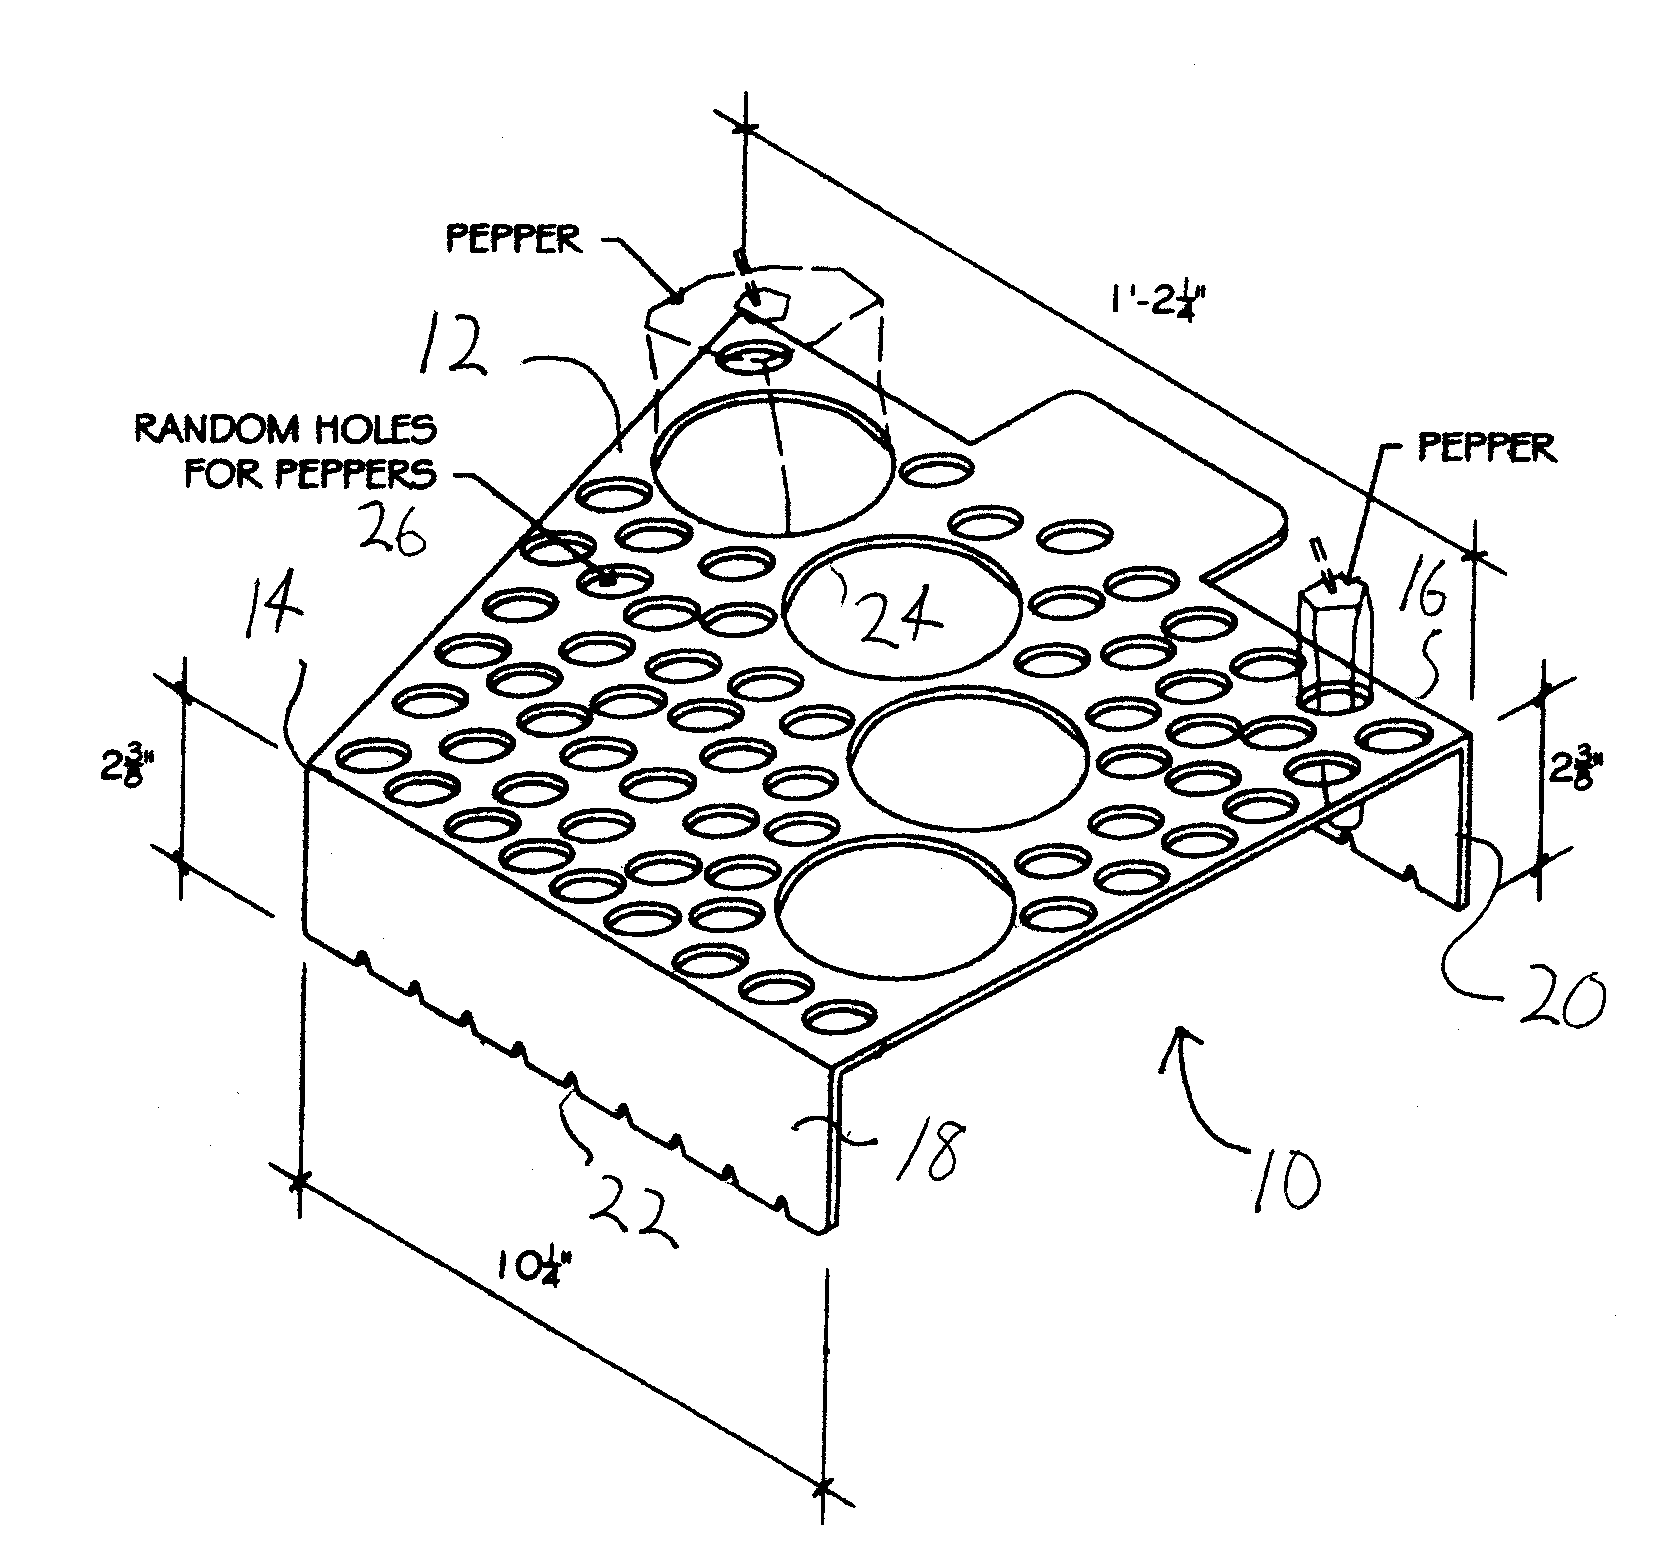 Grill and method for making and using the improved grill